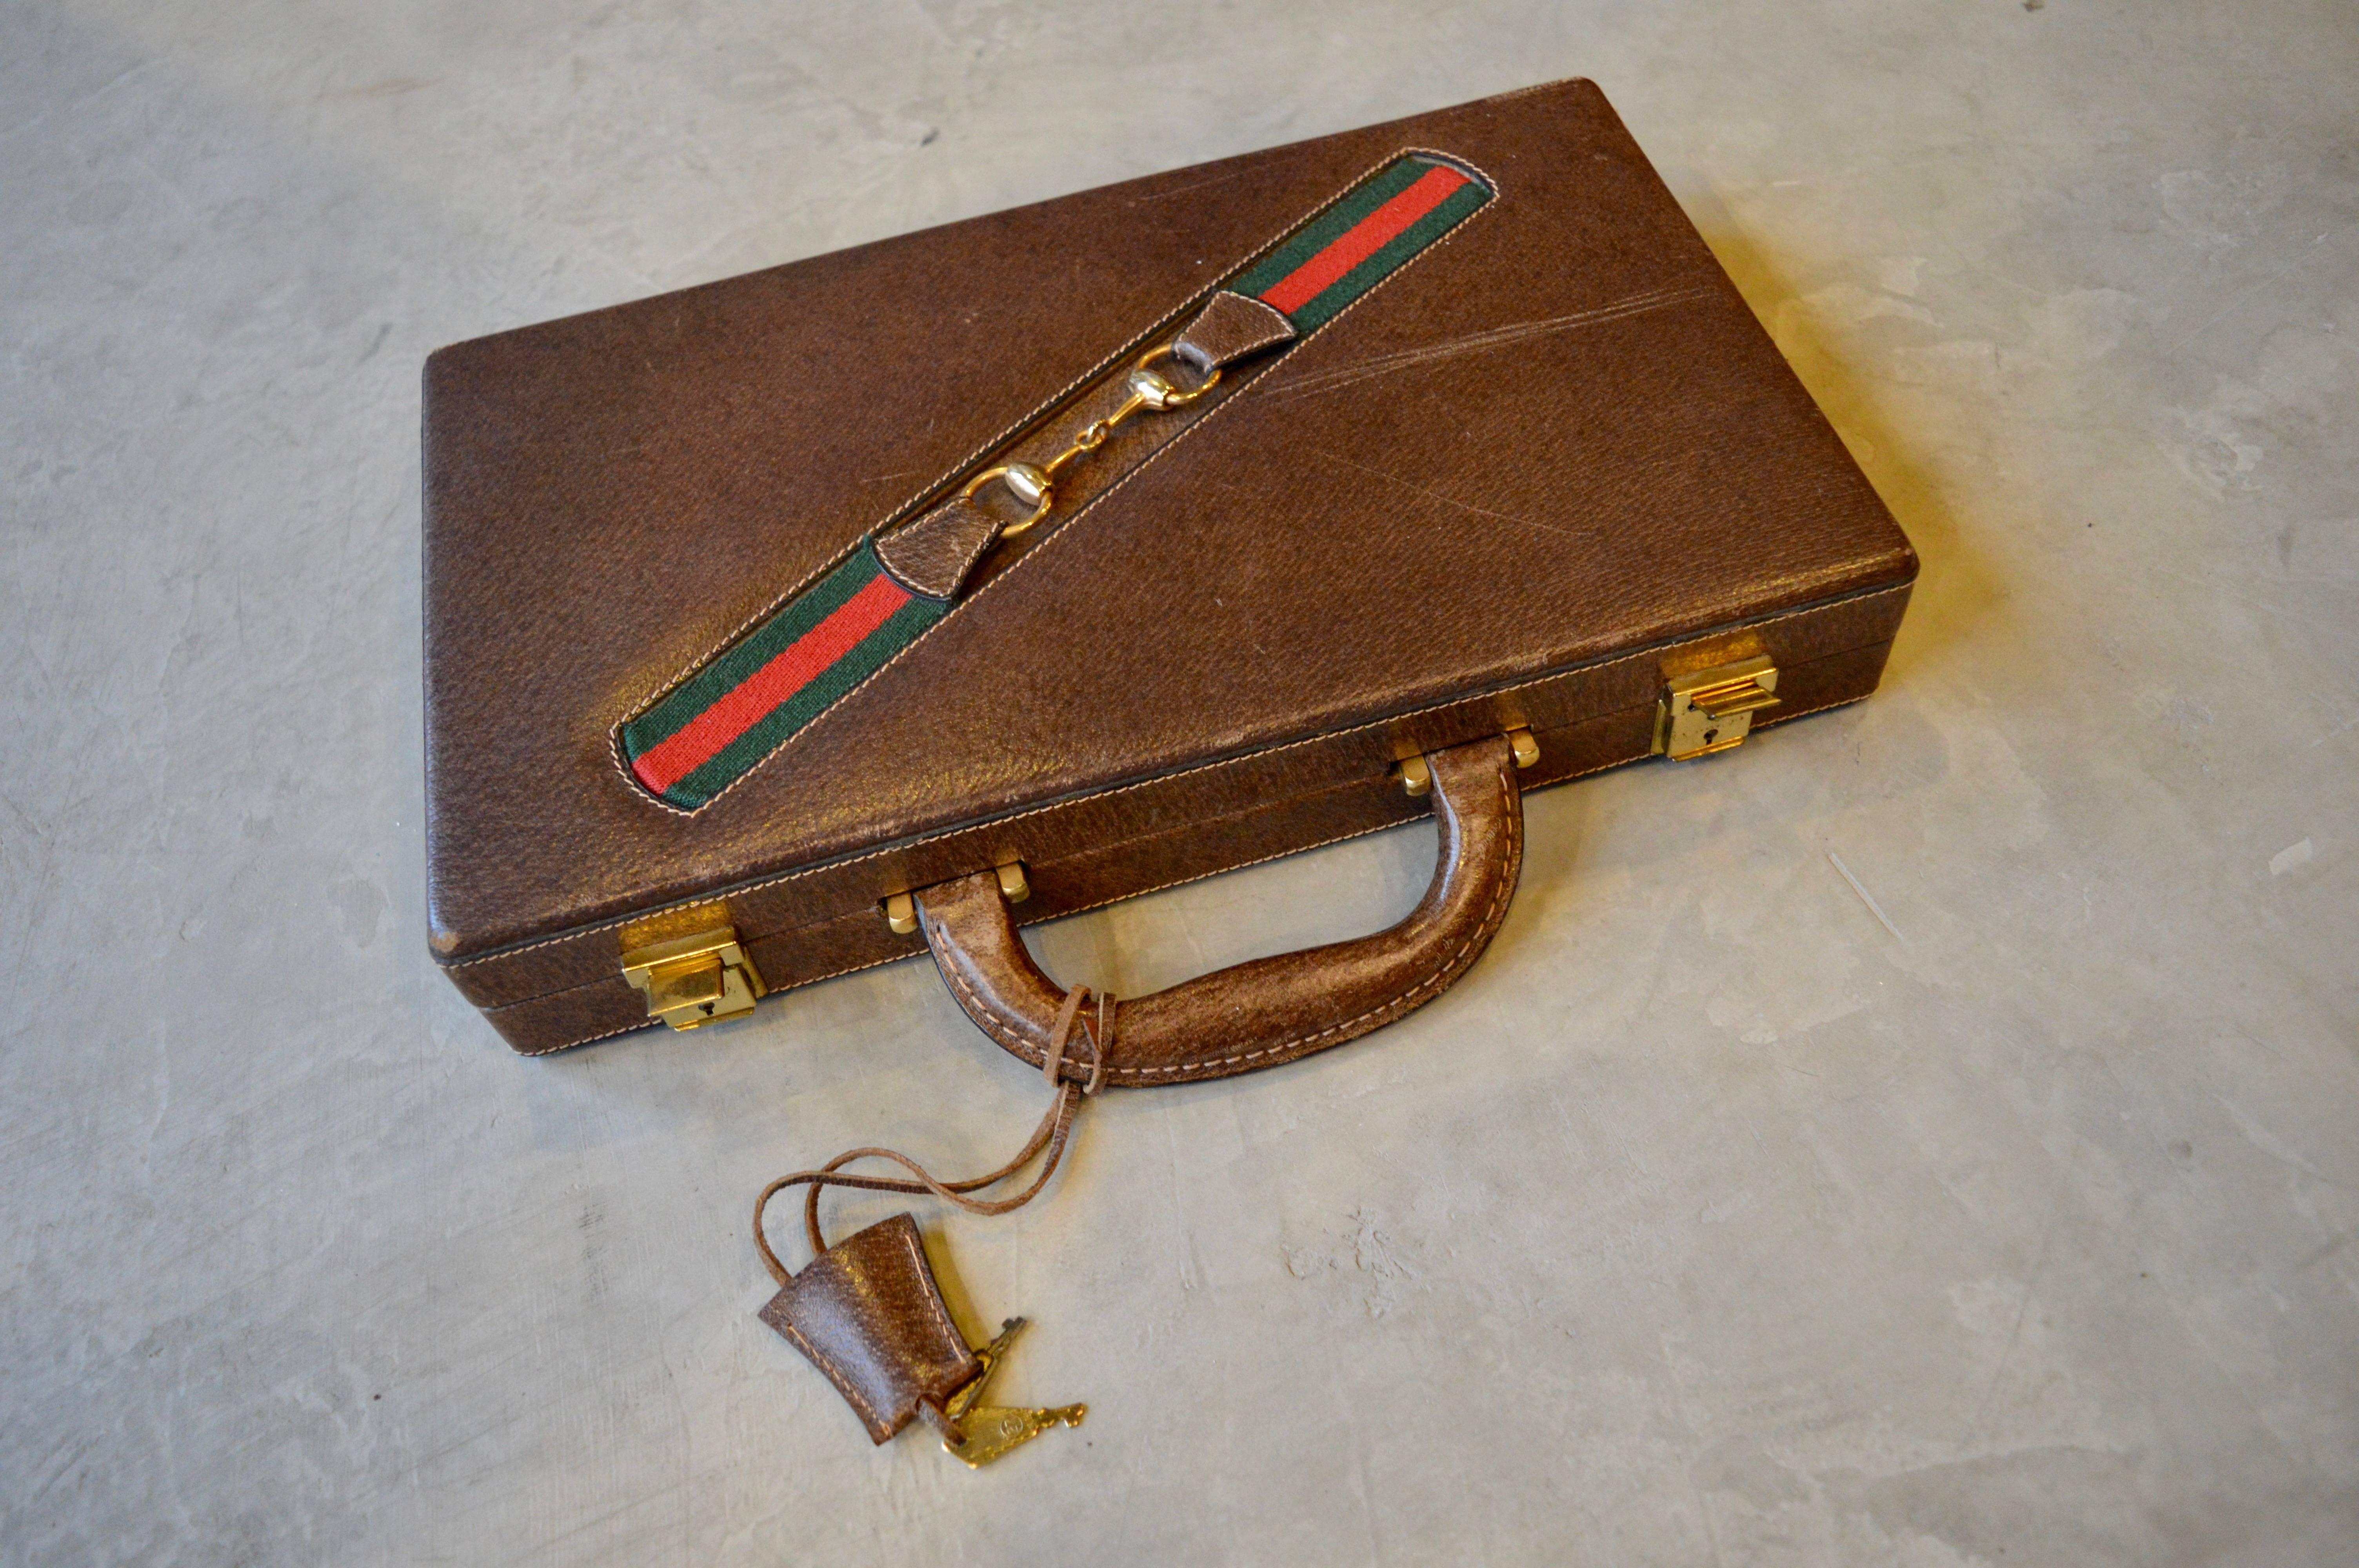 Handsome vintage Gucci backgammon set. Leather case with all pieces inside. Two leather cups, 15 black checkers, 15 white checkers and a set of red and green dice. Original key included. Brass closures on case not in working order. Otherwise set is